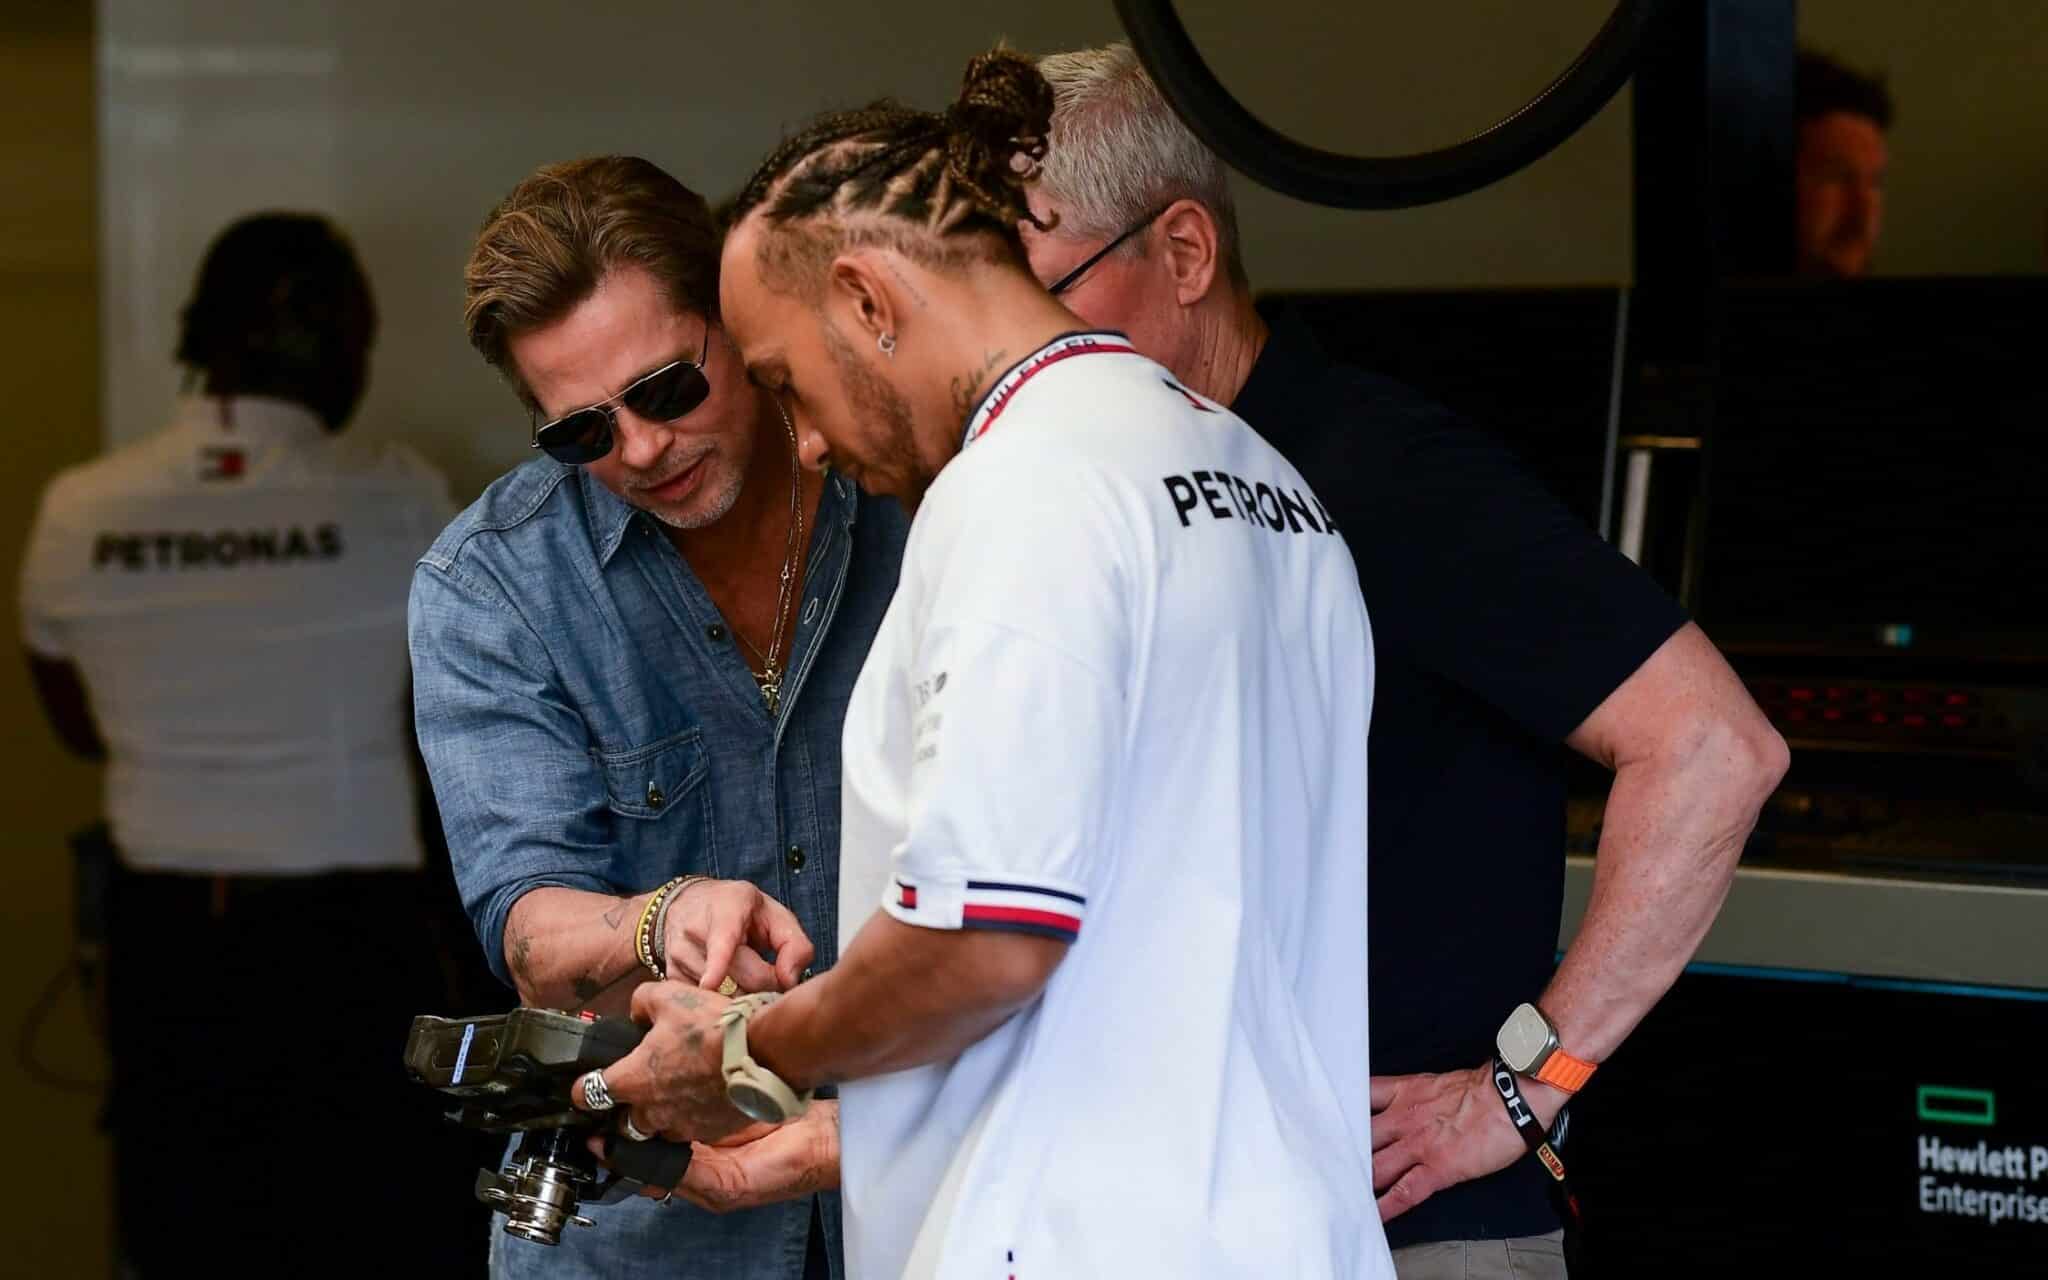 - Brad Pitt F1 team to be named "Apex", the actor is training in a real F2 car at Paul Ricard